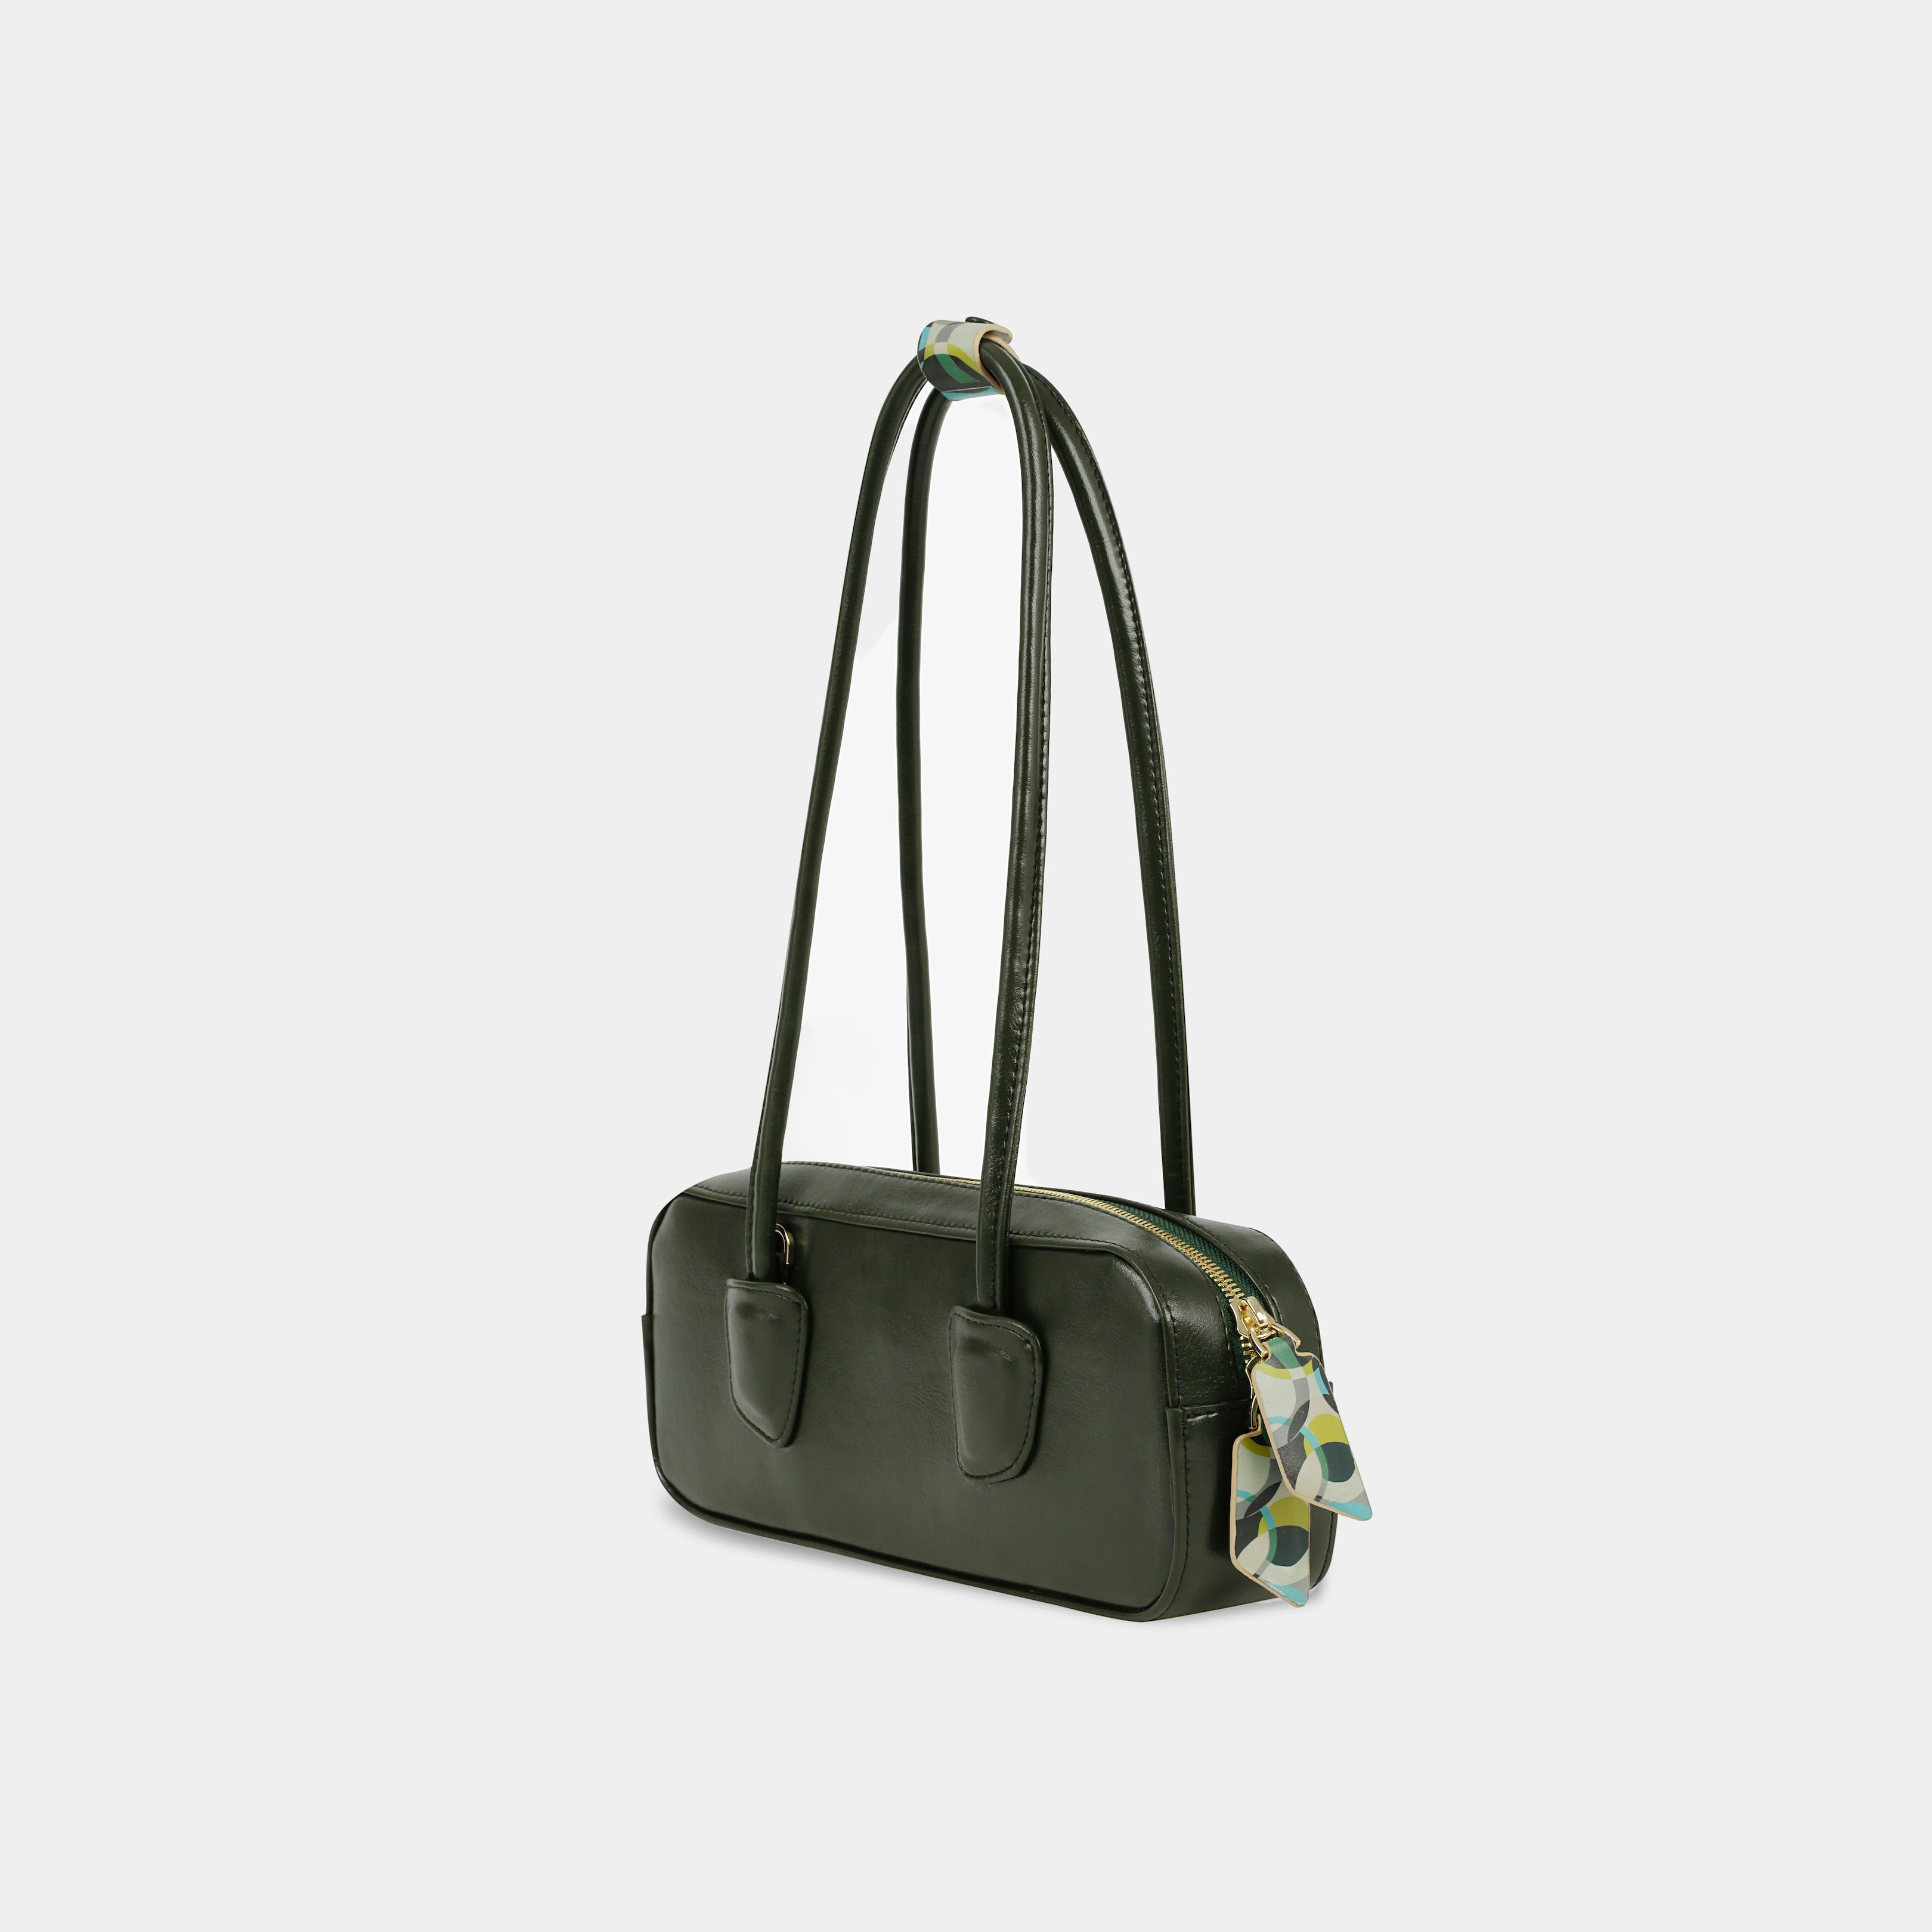 BREAKING bag in green and black color